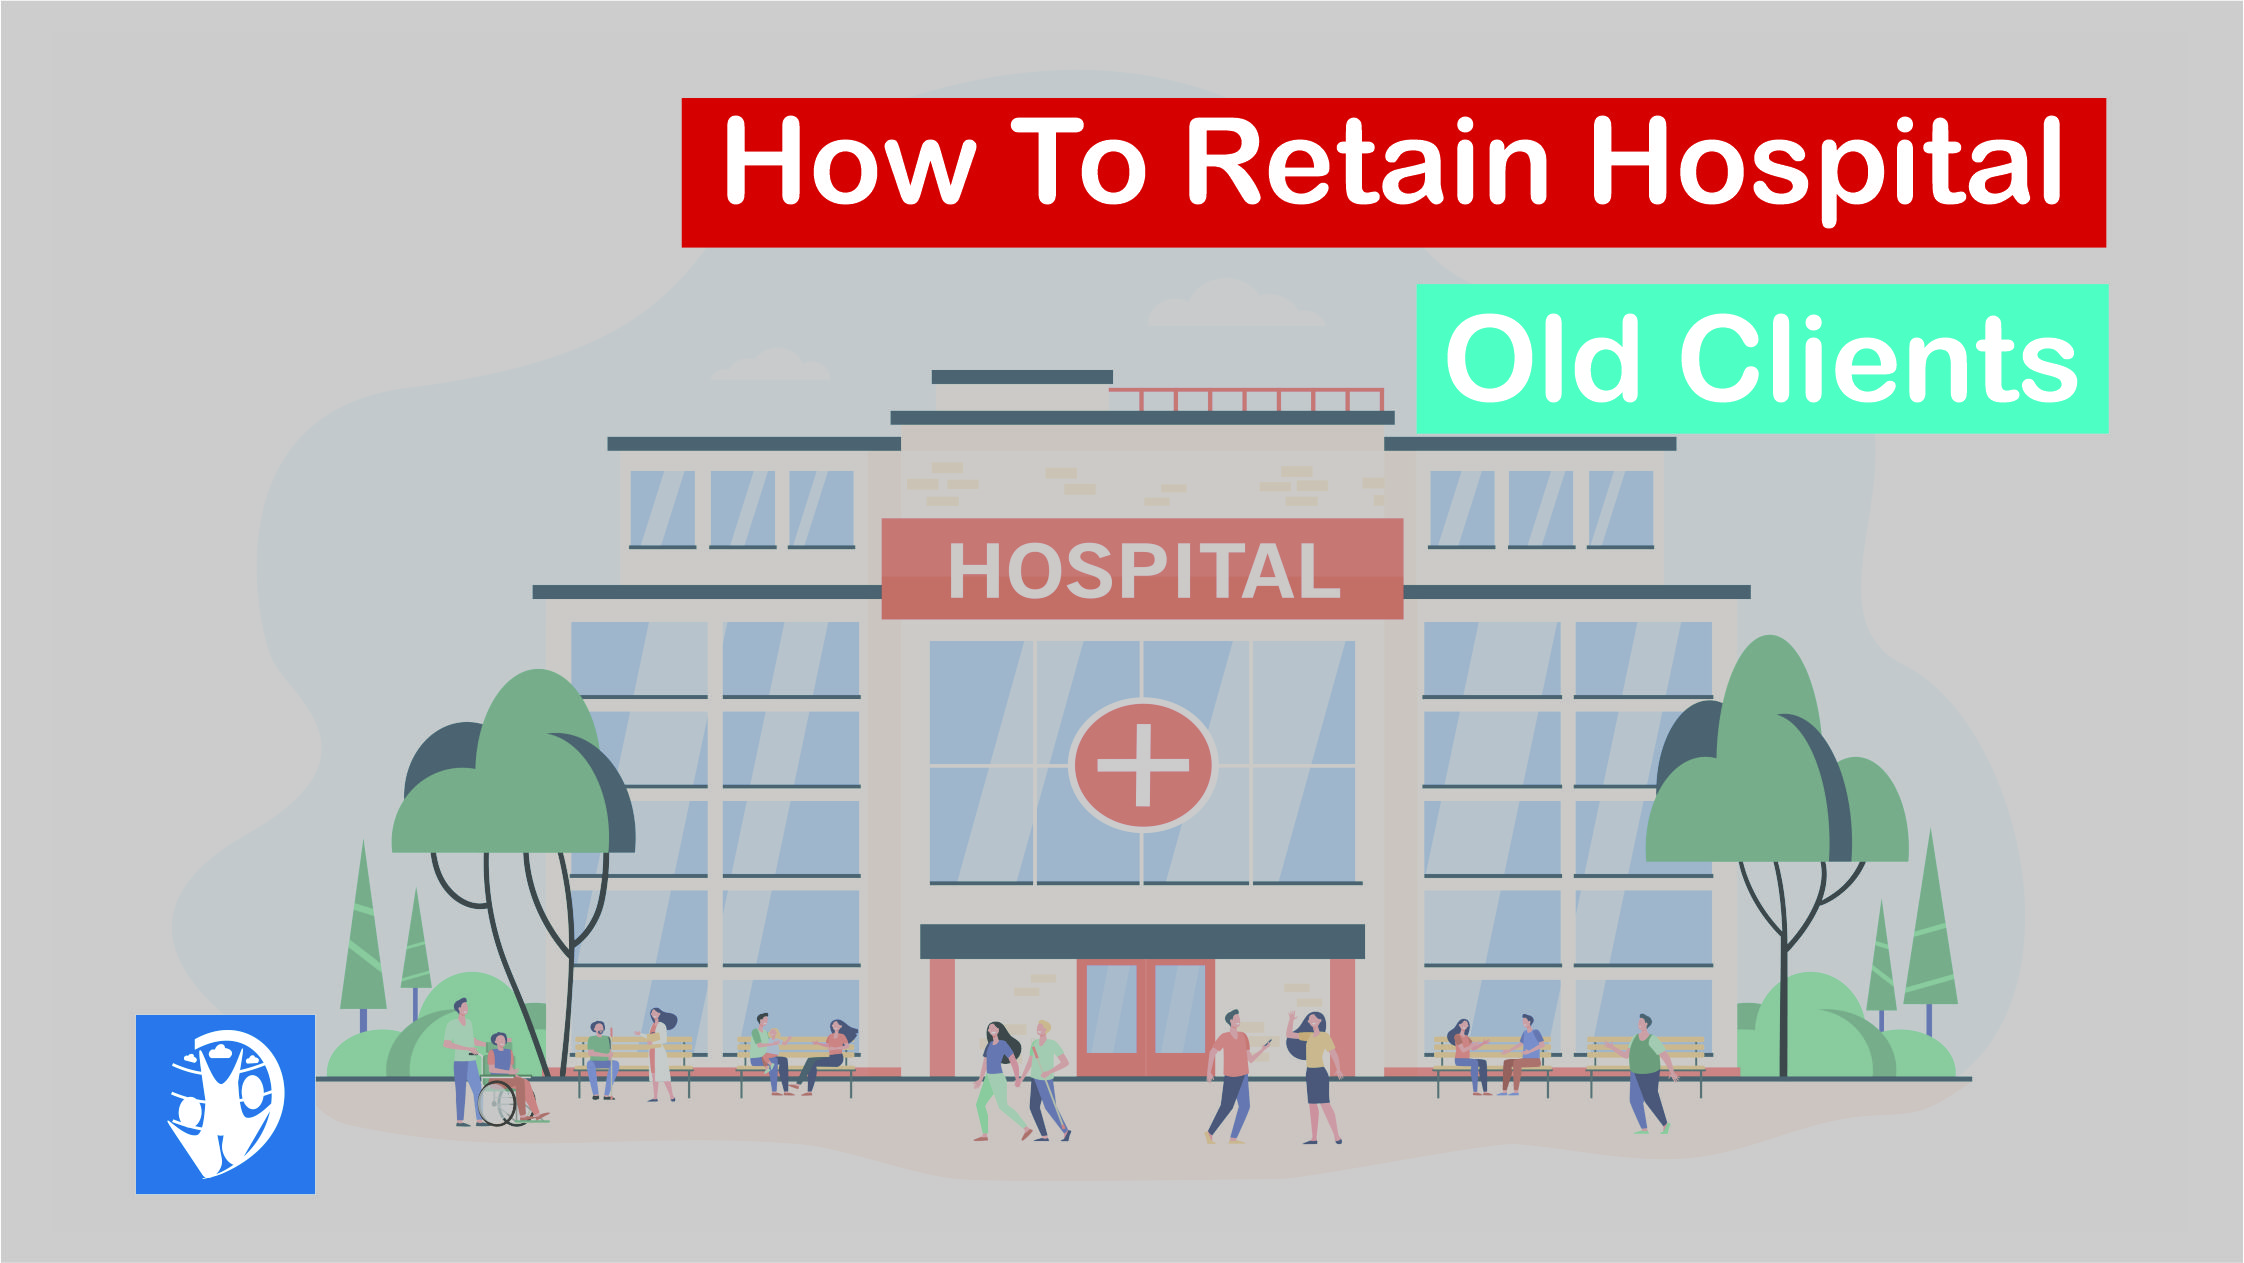 How To Retain Hospital Old Clients